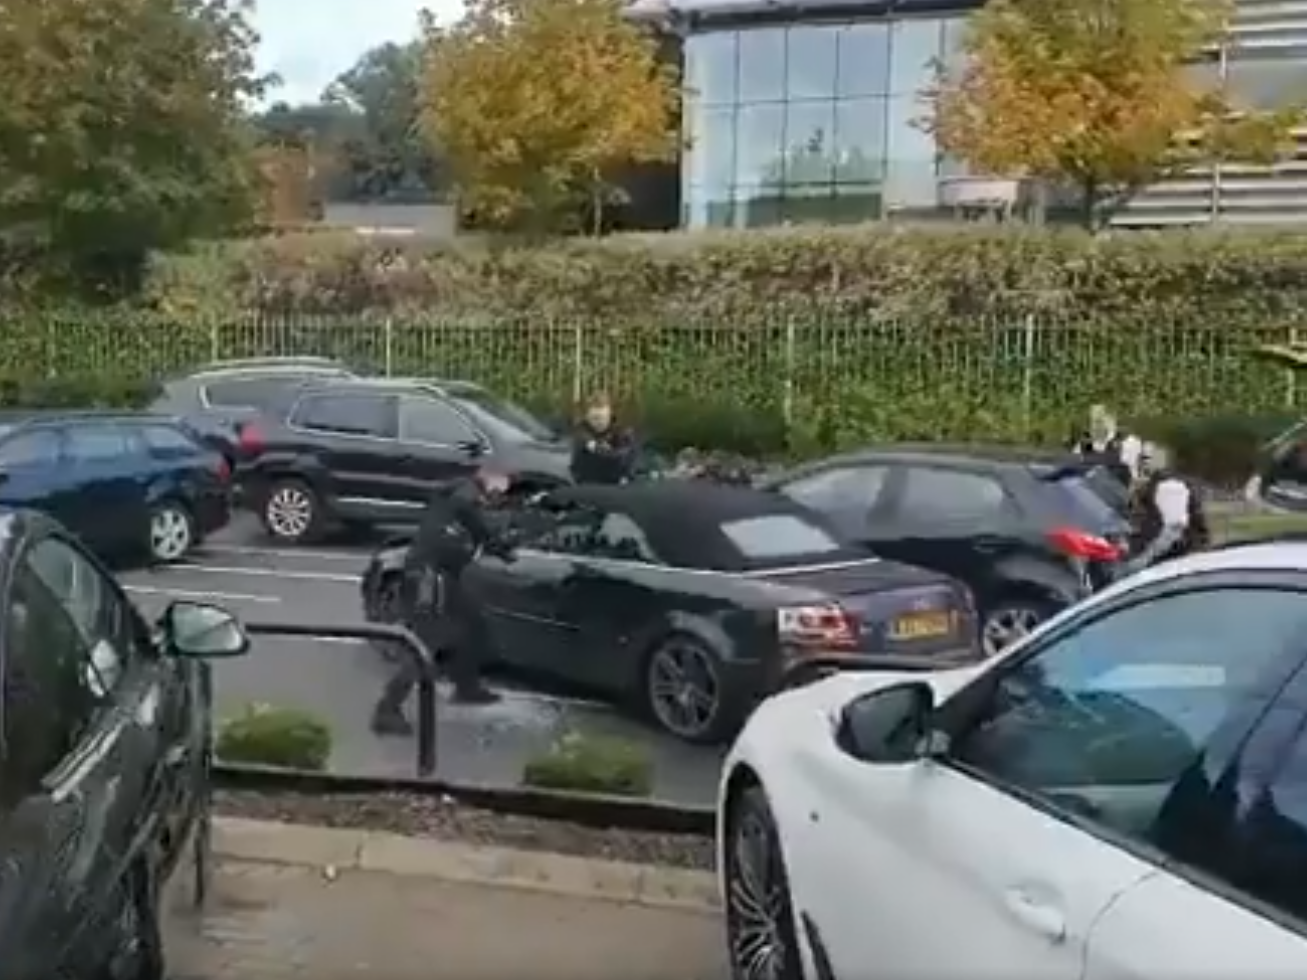 Armed police officers point their rifles at the teenagers inside the car after a high-speed chase